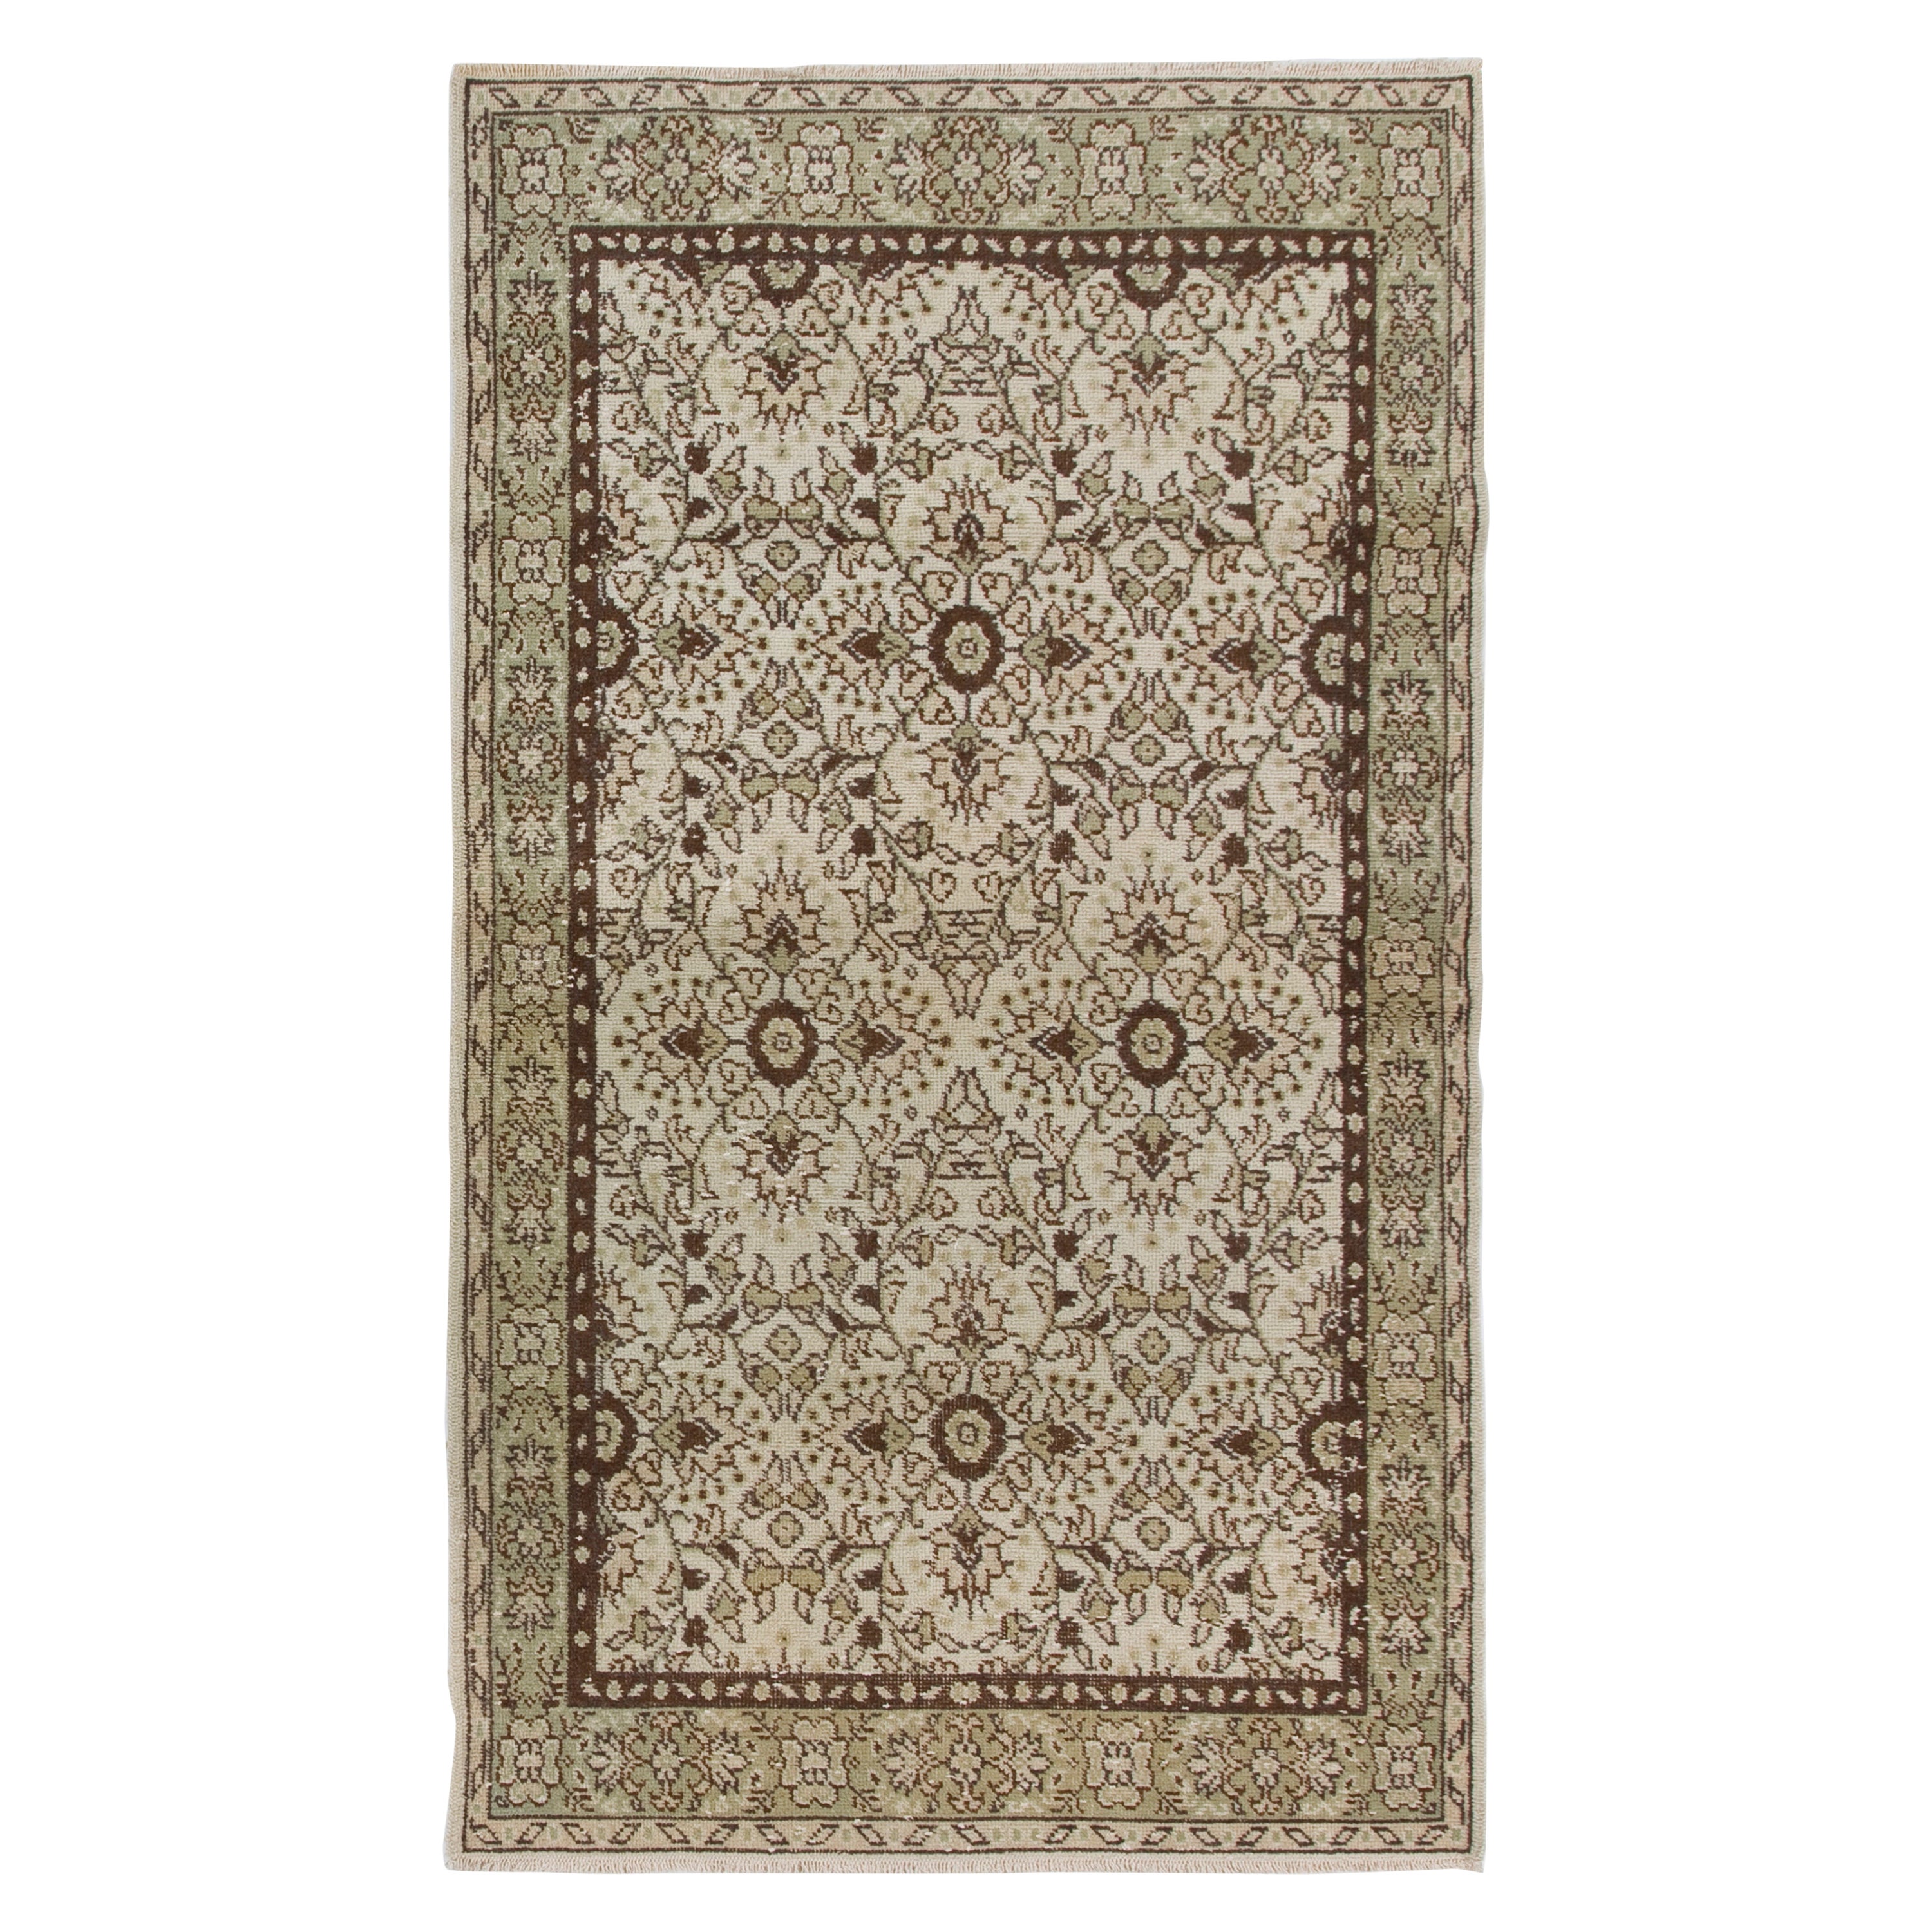 4x6.8 Ft Handmade Vintage Floral Rug in Ivory, Brown and Soft Faded Green Color For Sale